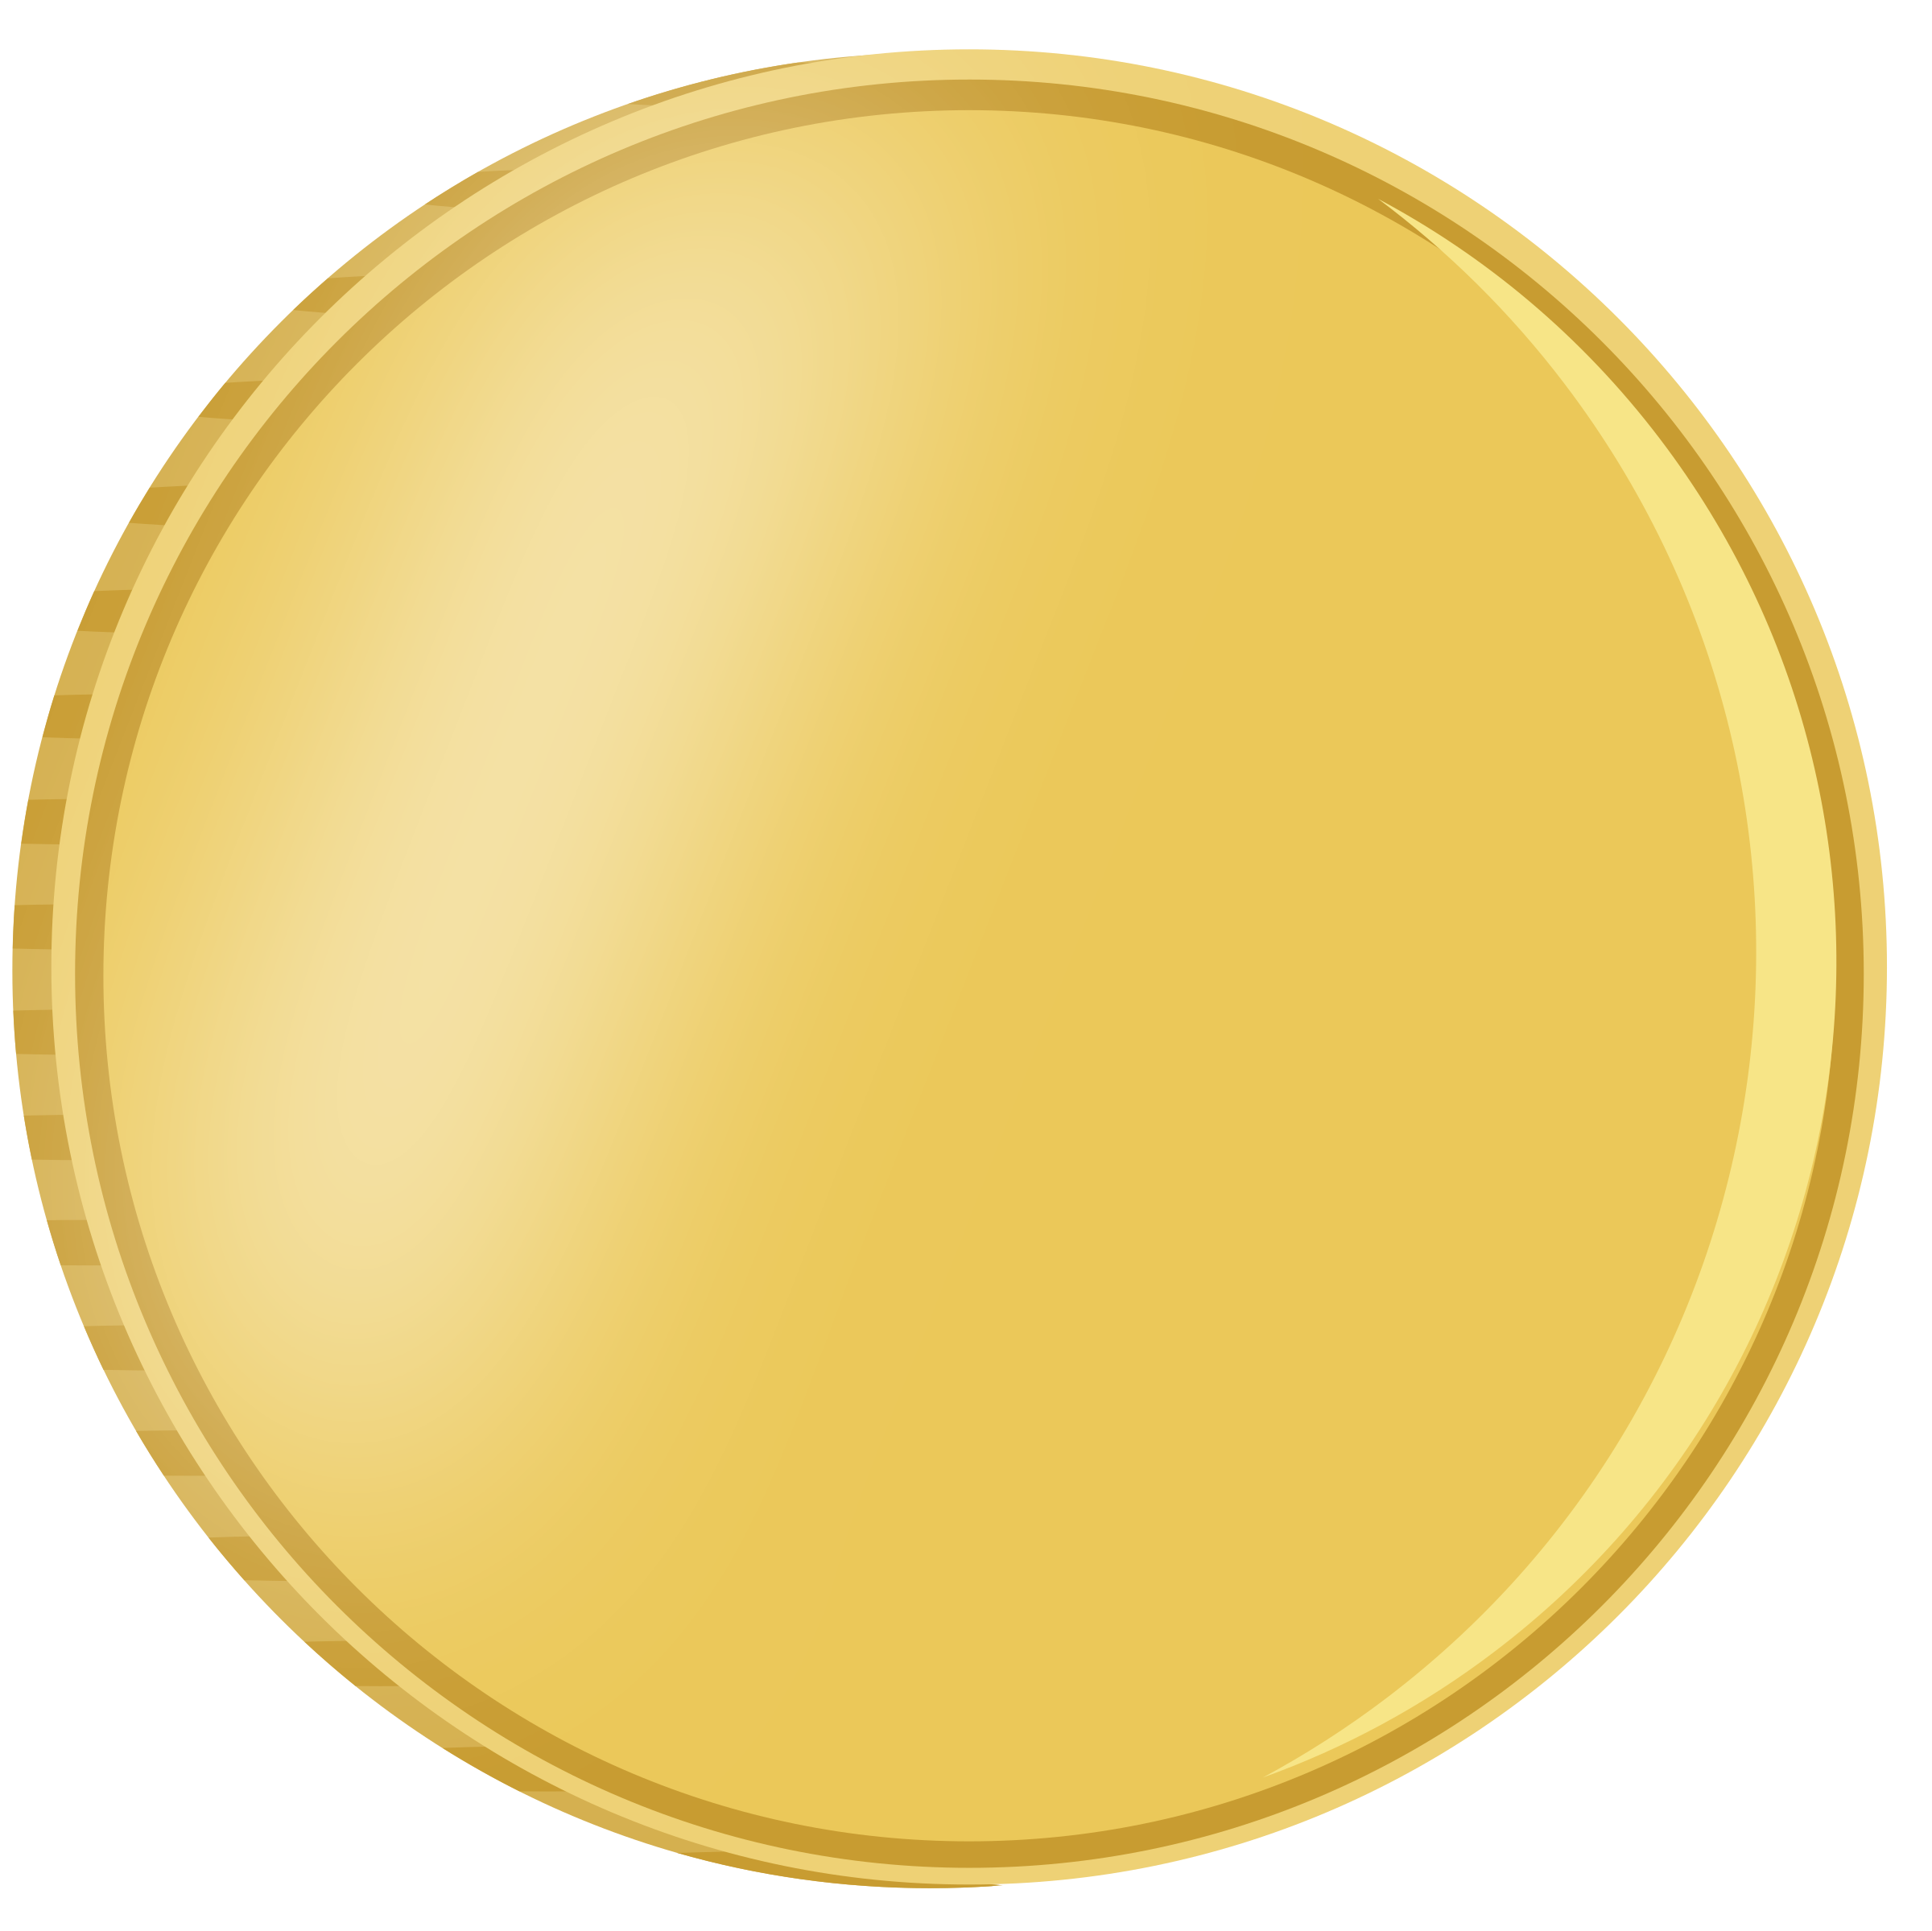 Blank Gold Coin Png | Www.imgkid Pluspng.com   The Image Kid Has It Hdpng.com  - Blank Coin, Transparent background PNG HD thumbnail